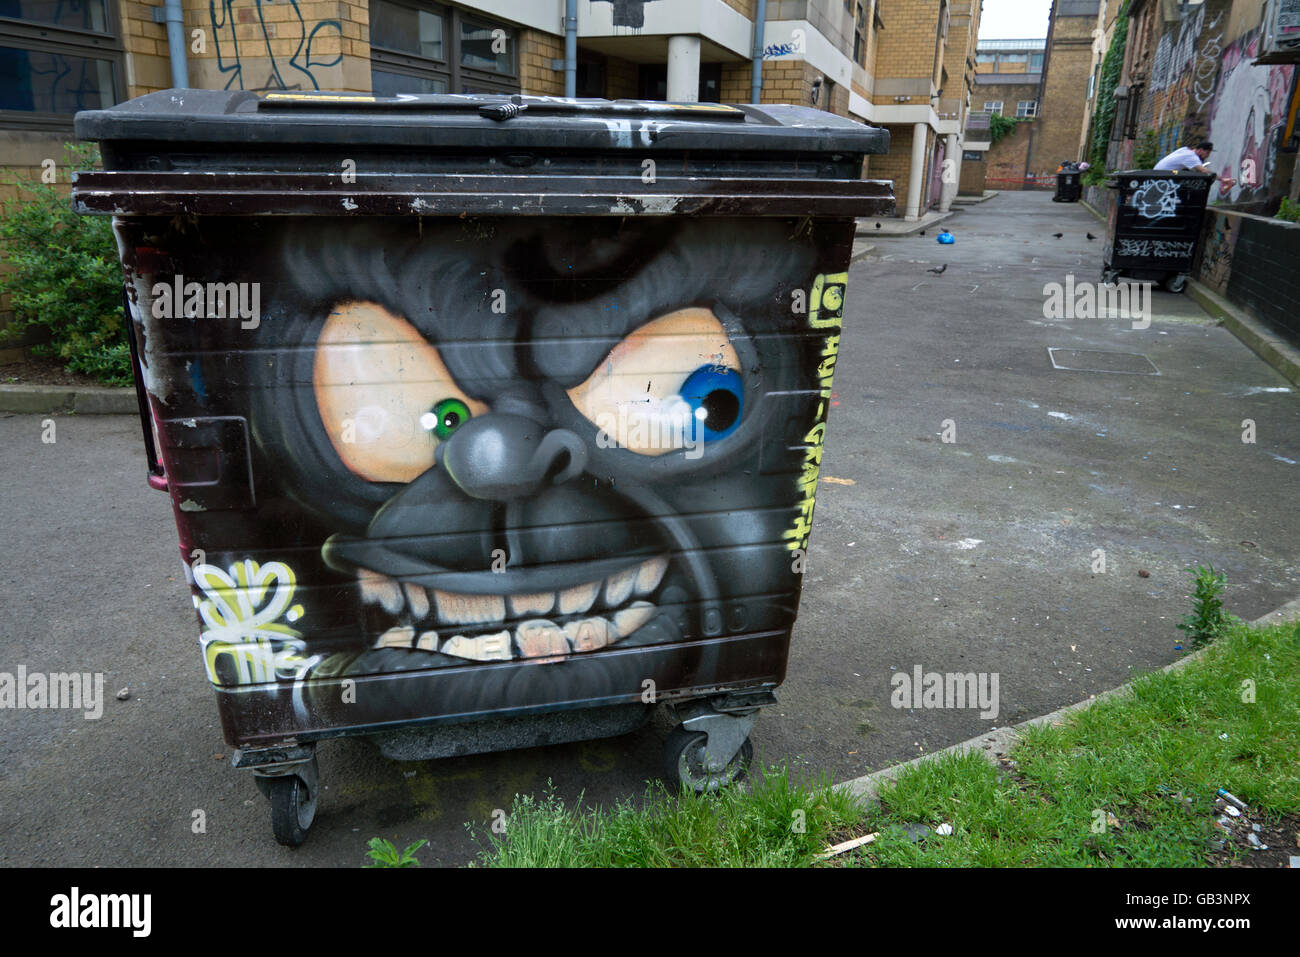 A menacing looking cartoon face painted on a bin in an alley near the Brick Lane area of Shoreditch, London, UK. Stock Photo